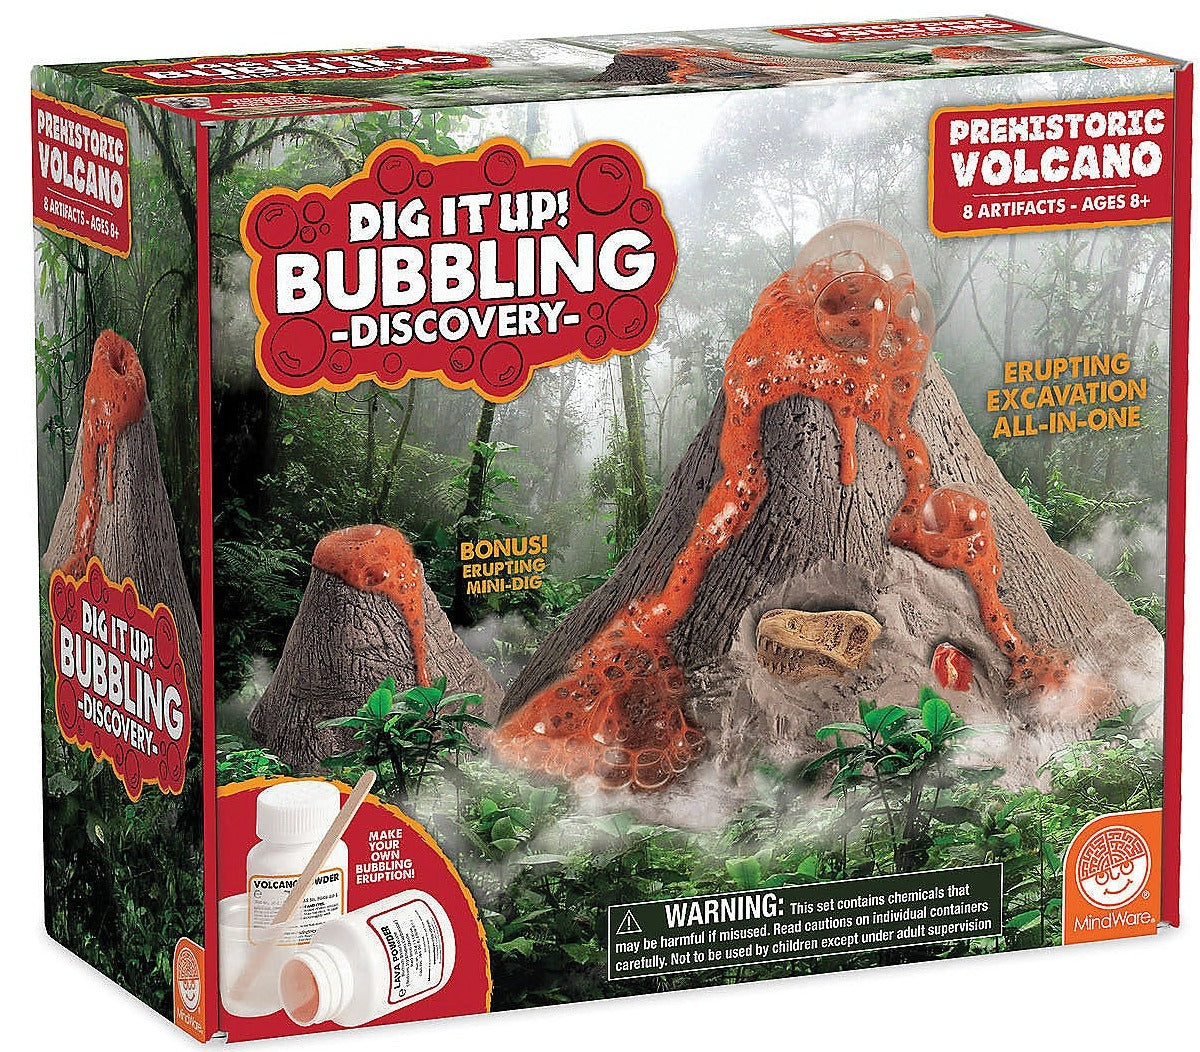 Dig it Up Bubbling Volcano Discovery